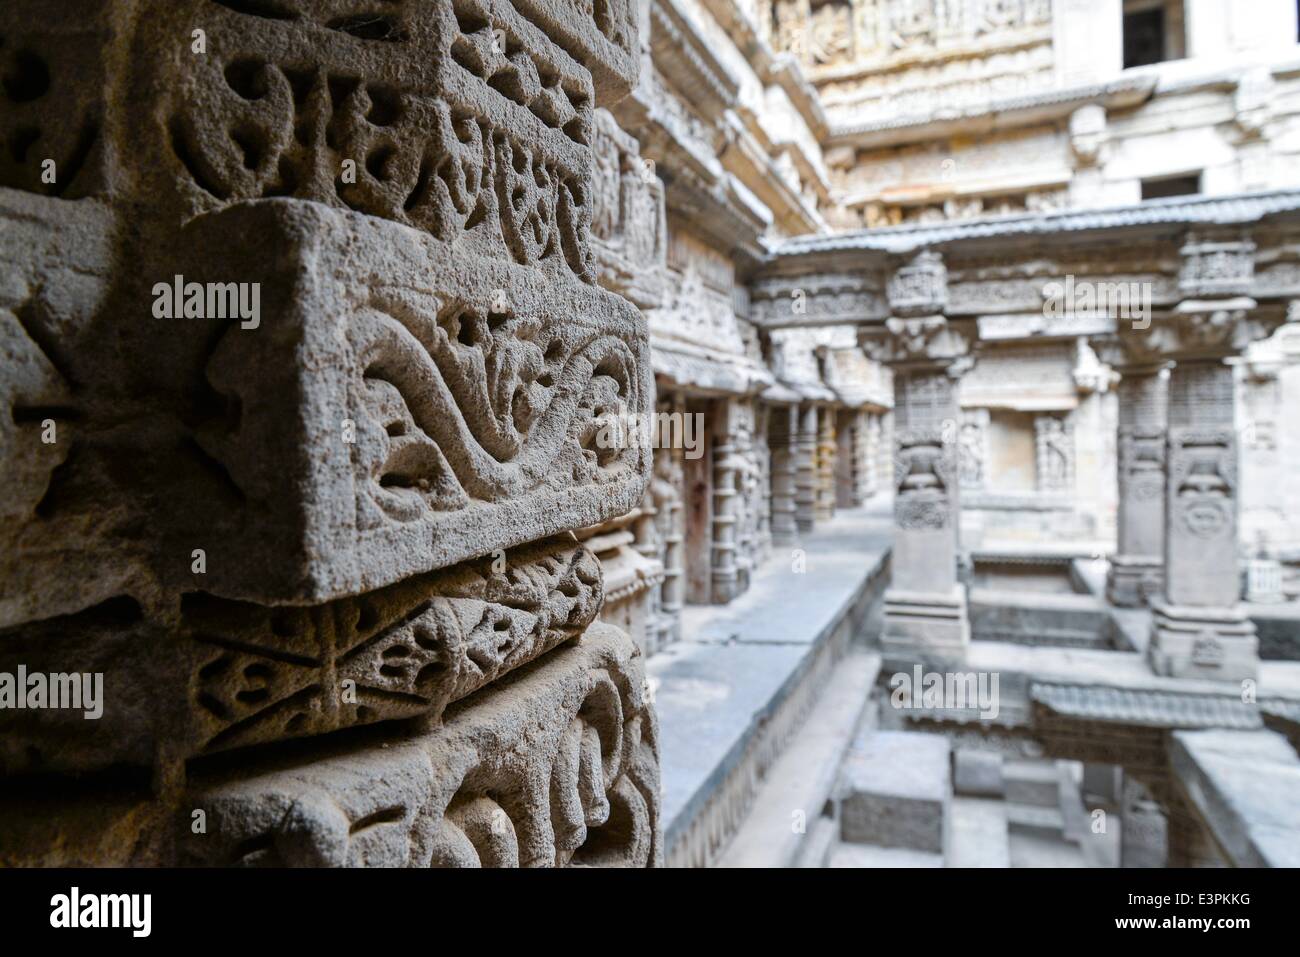 The strong posts of the structure of 'Rani-ki-Vav'. Rani Ki Vav is one of the finest stepwells in India. It is a stepwell in Gujarat built in the 11th century in memory of King Bhimdev I of the Solanki dynasty. The stepwell was approved by UNESCO as World Heritage Site for its exceptional example of technological development in utilizing ground water resources. (Photo by Nisarg Lakhamani/Pacific Press) Stock Photo